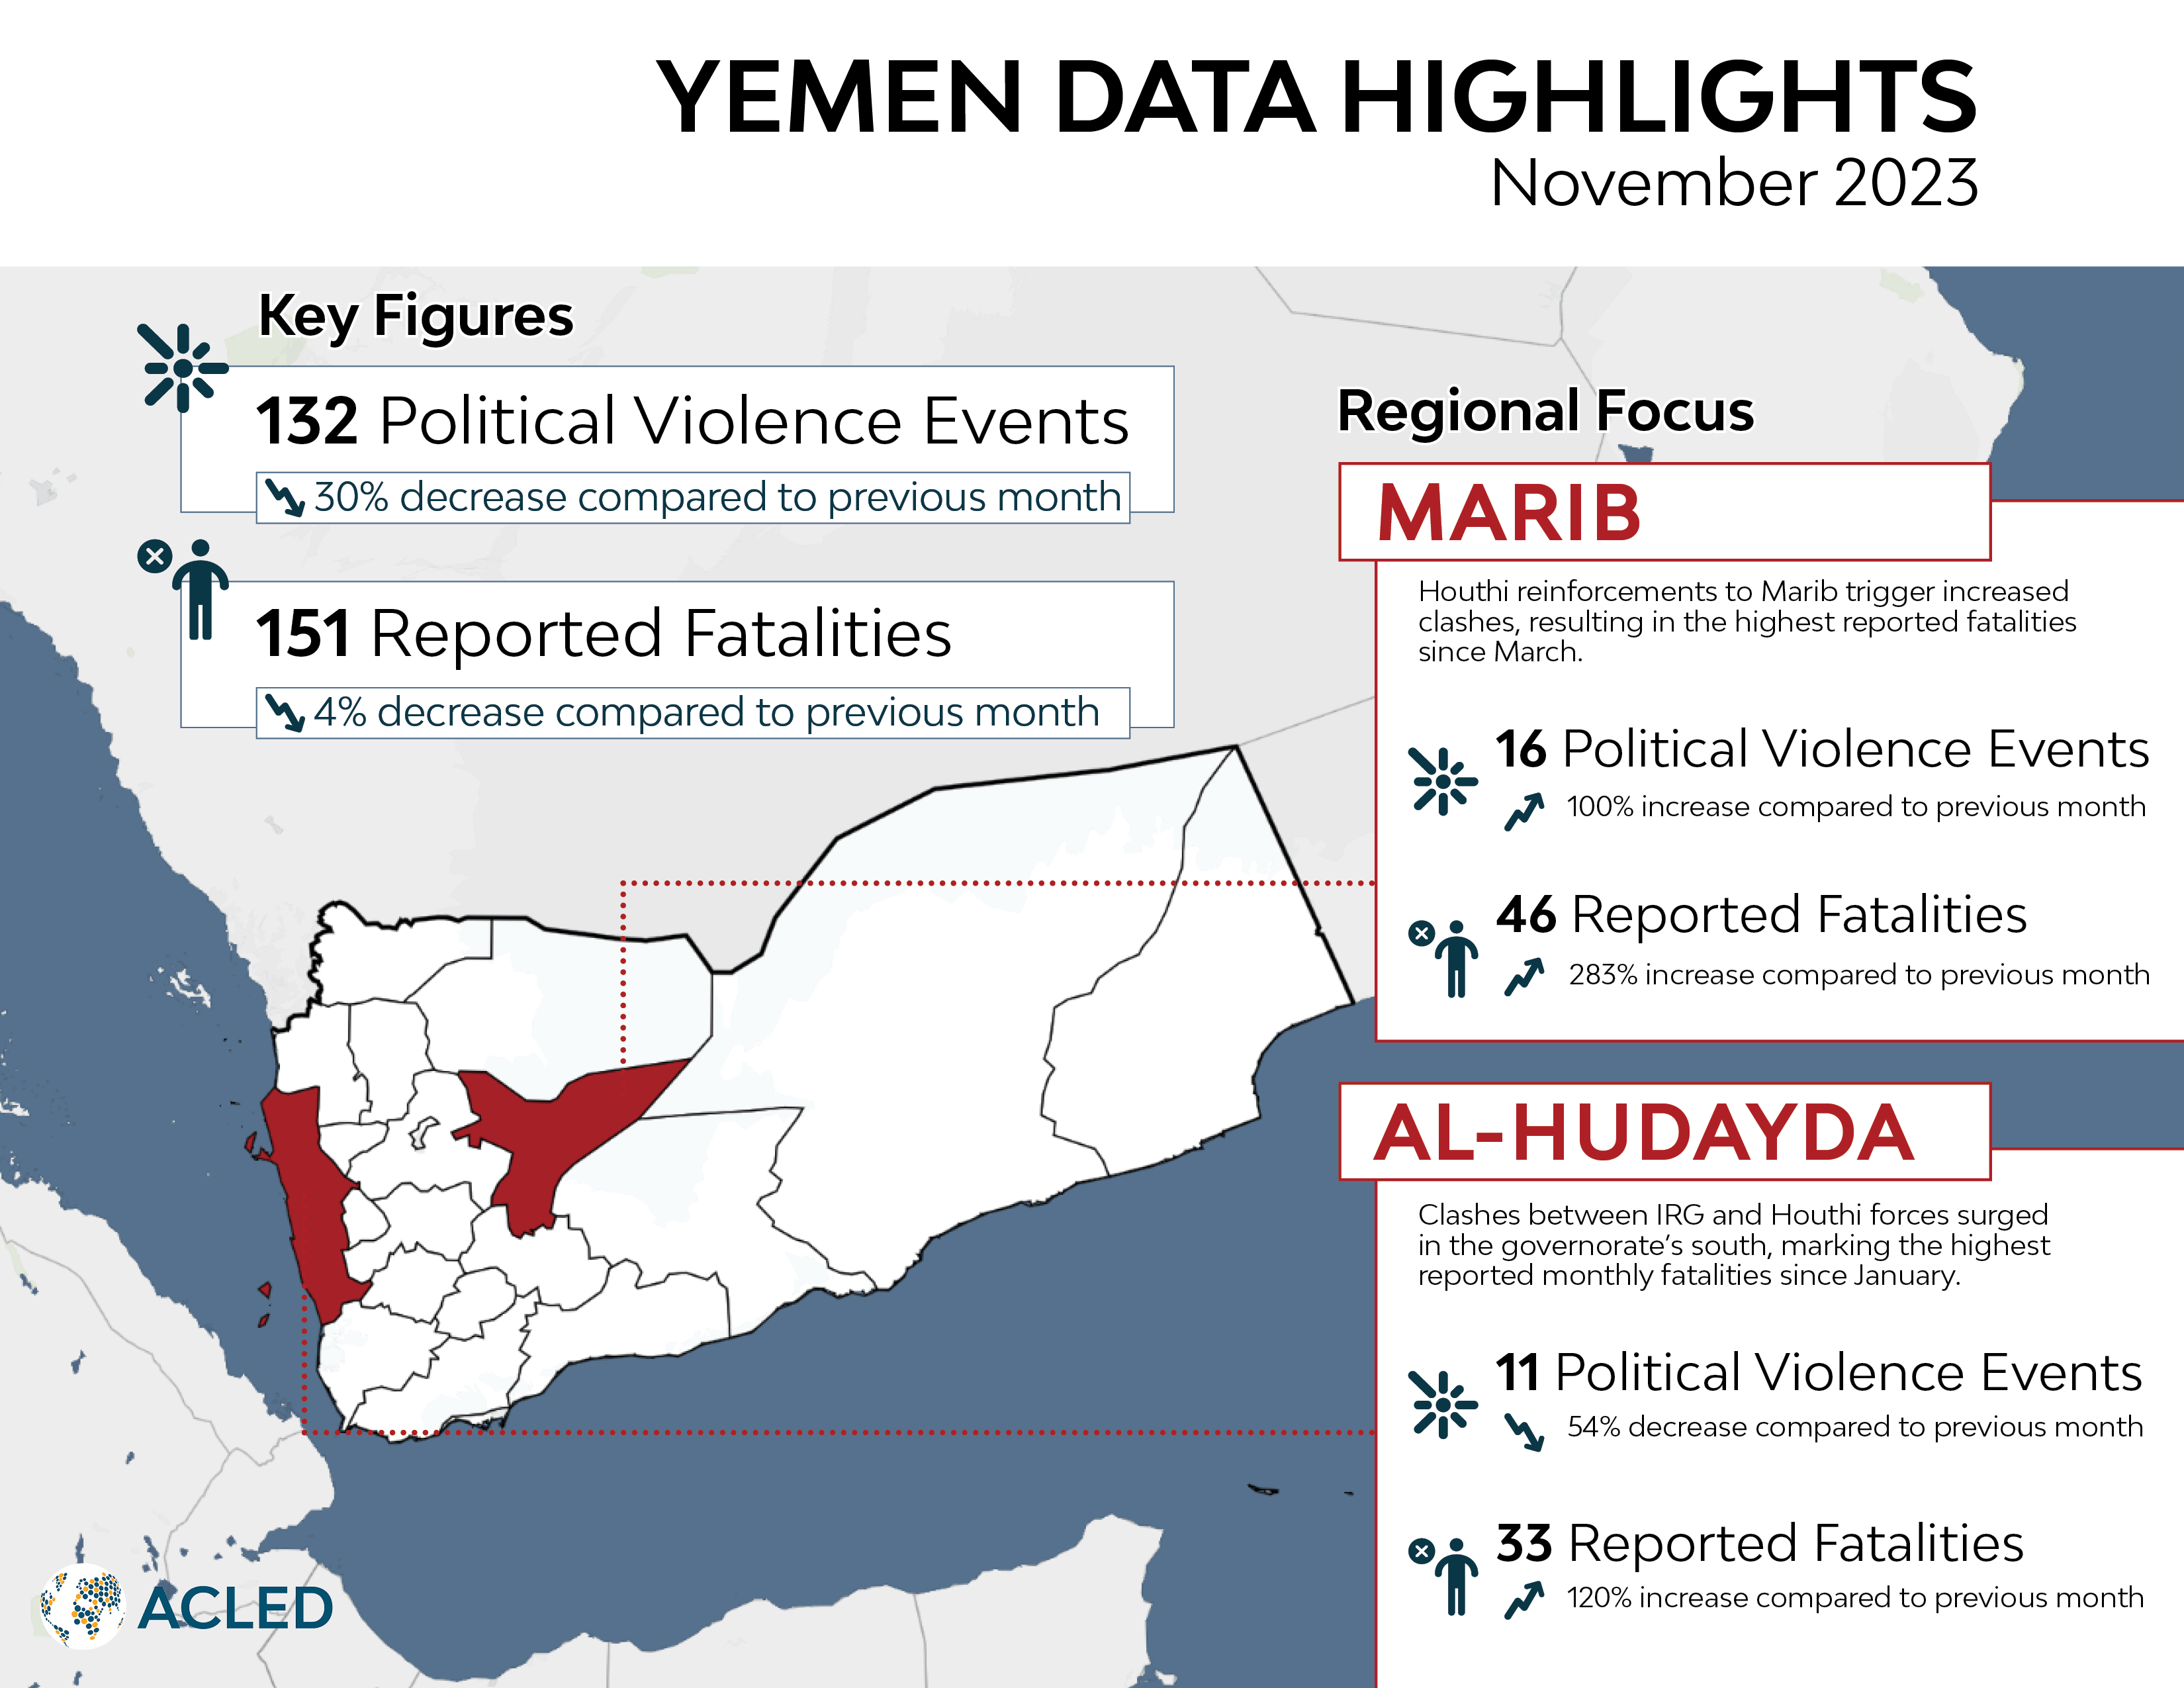 Yemen data on political violence events and reported fatalities in November 2023